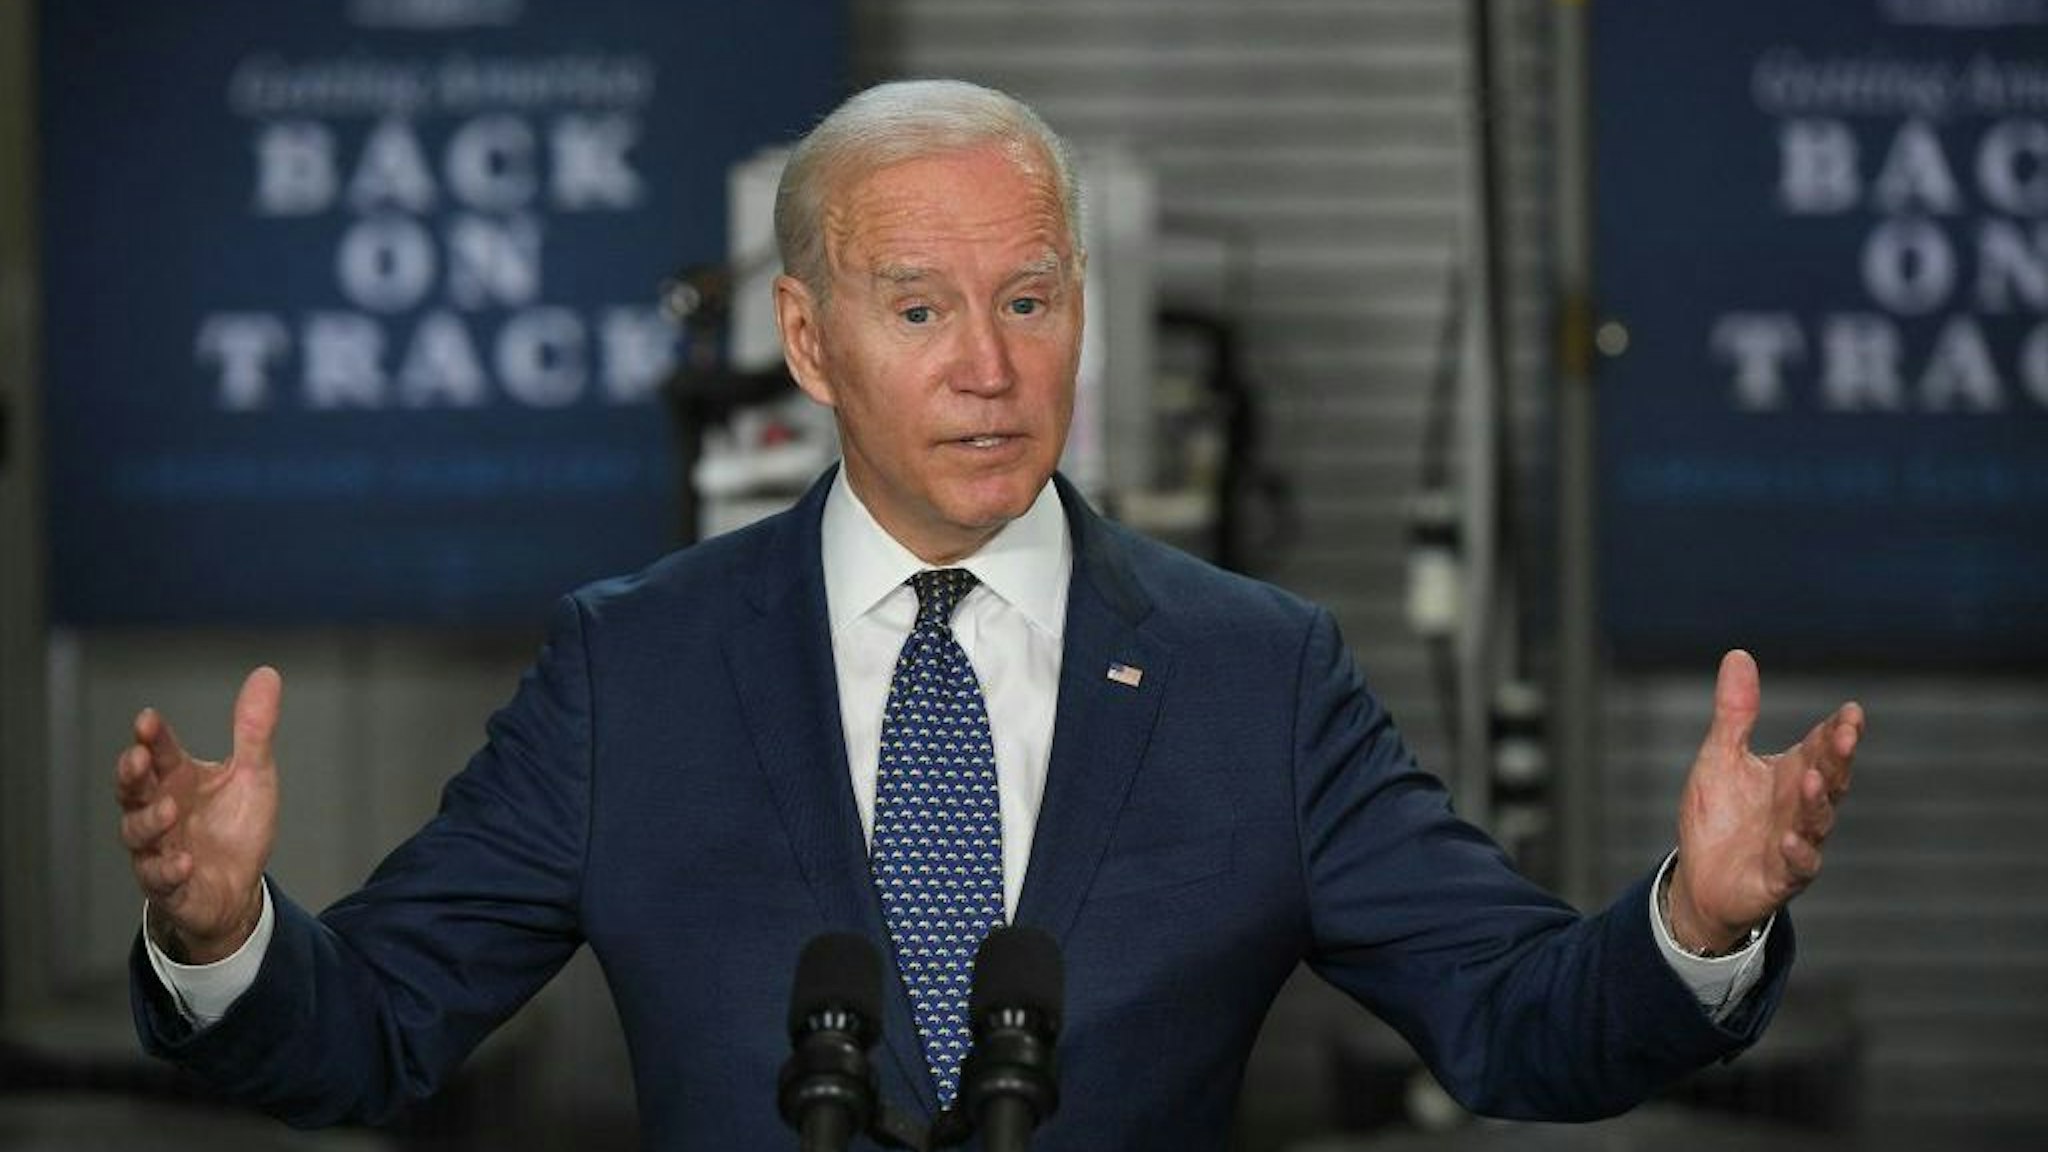 US President Joe Biden speaks on the American Jobs Plan, following a tour of Tidewater Community College in Norfolk, Virginia on May 3, 2021. (Photo by MANDEL NGAN / AFP) (Photo by MANDEL NGAN/AFP via Getty Images)